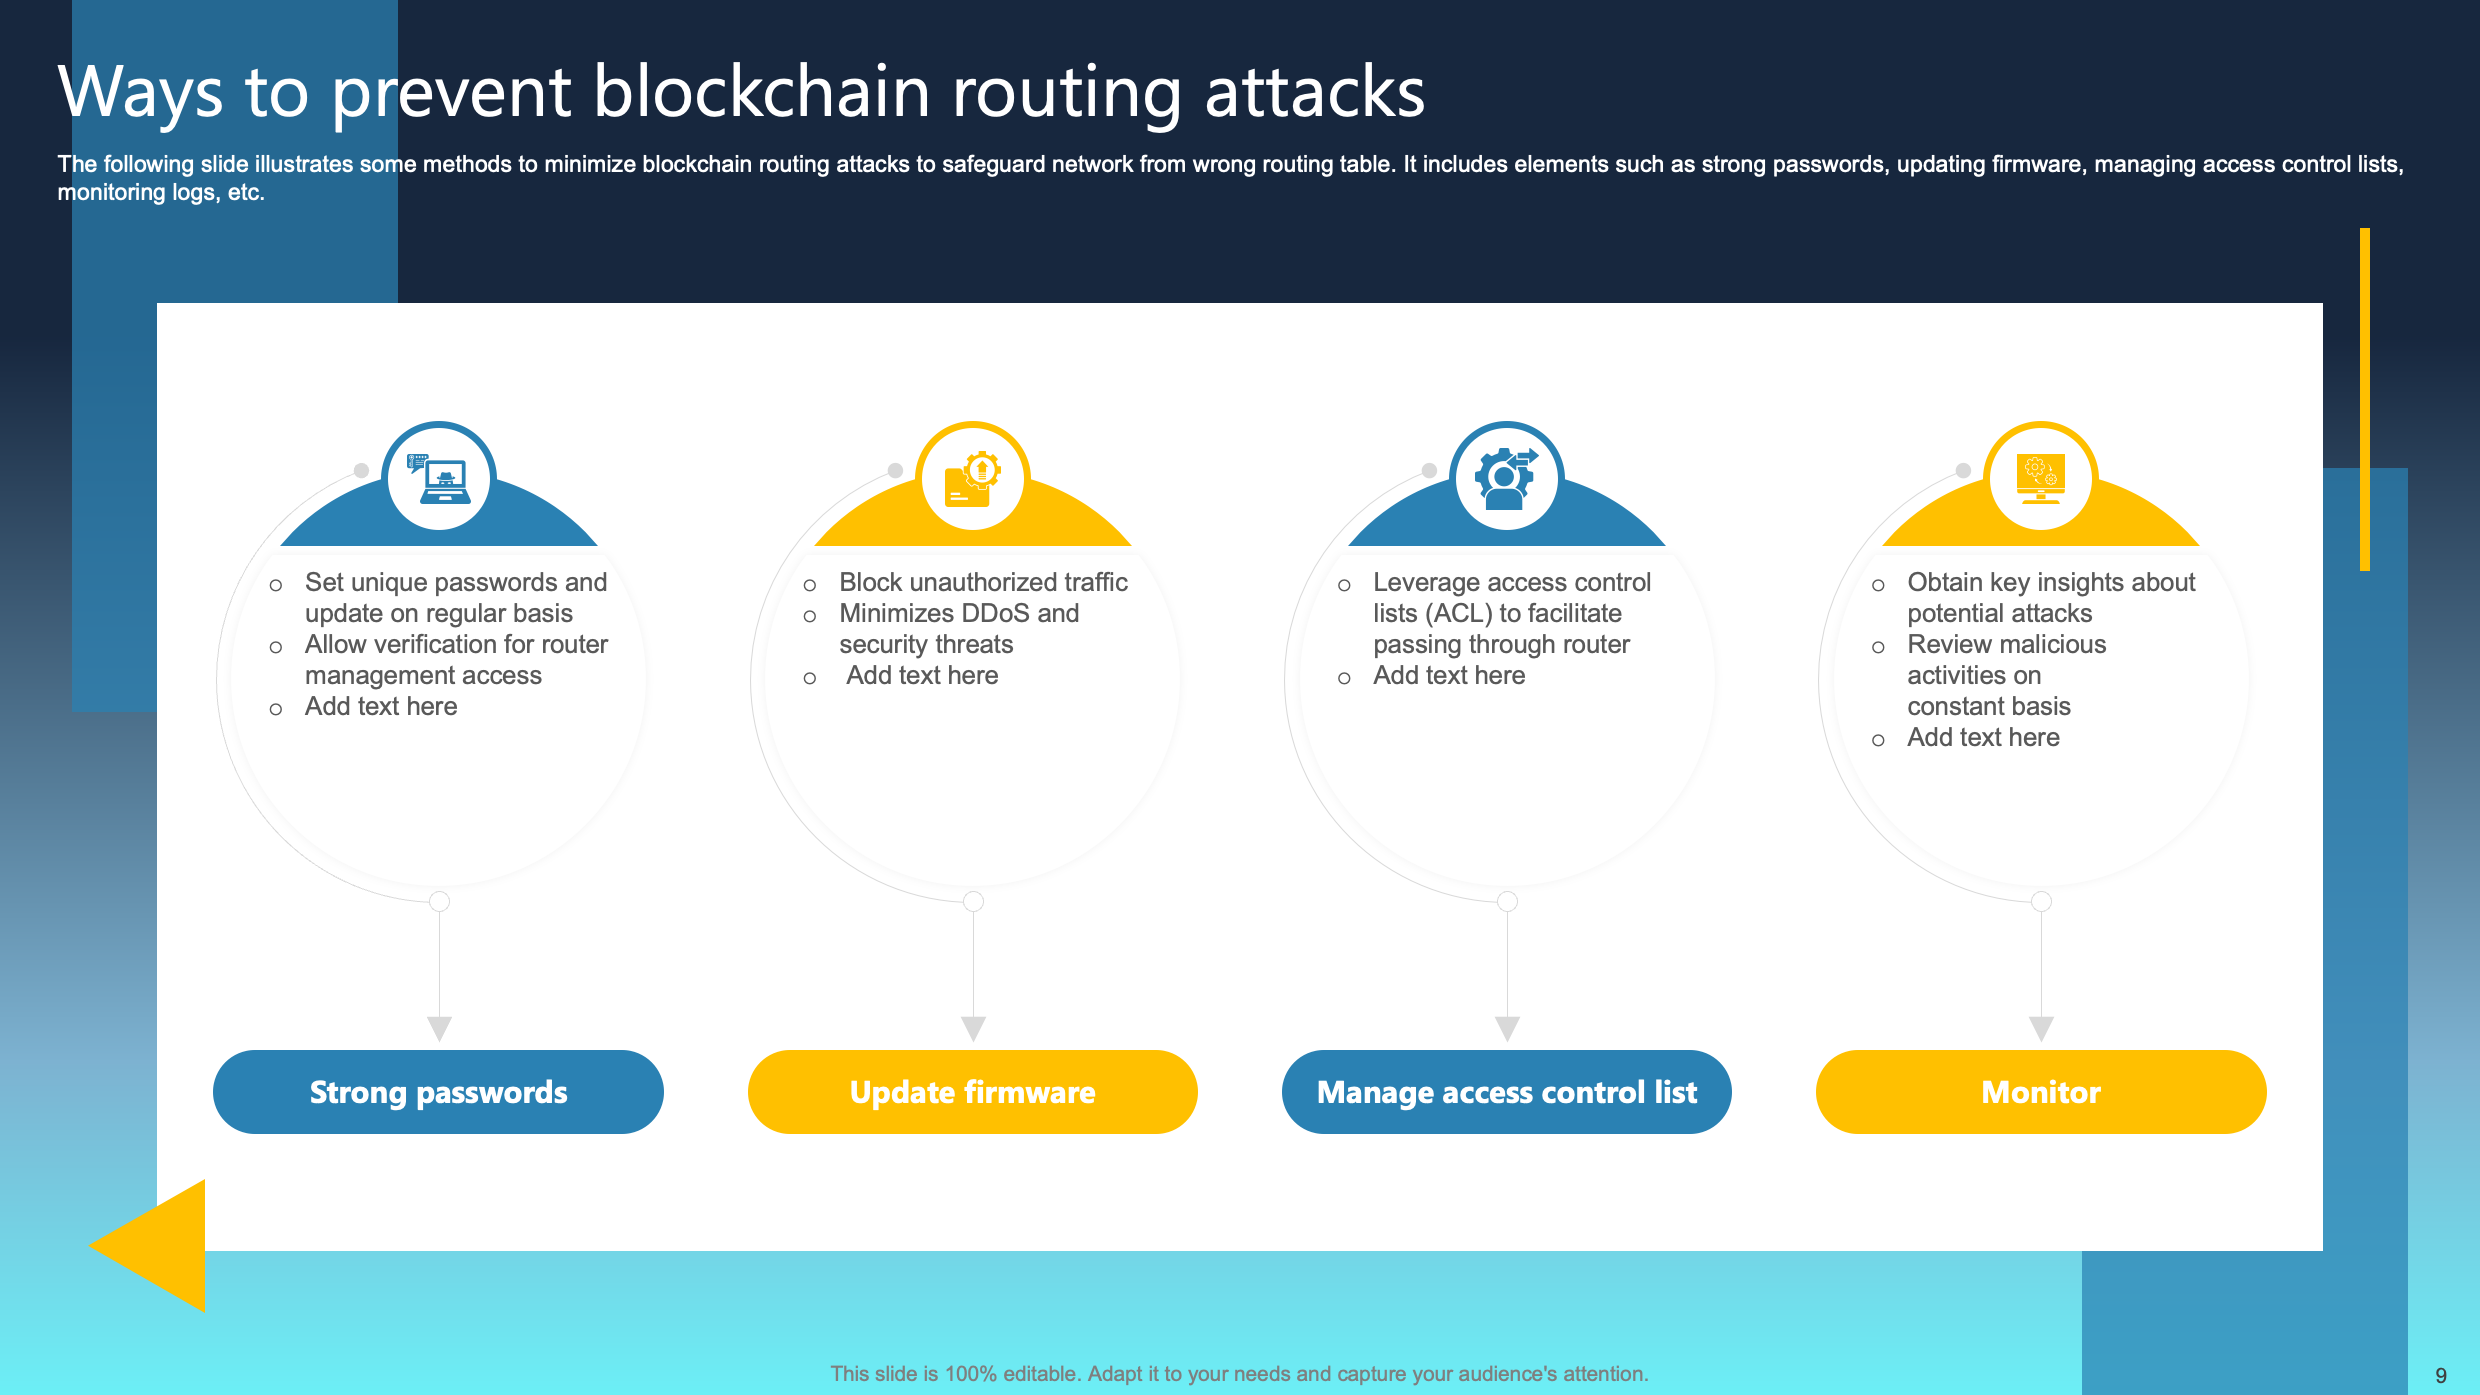 Ultimate Guide for Blockchain Cybersecurity and Risk Management